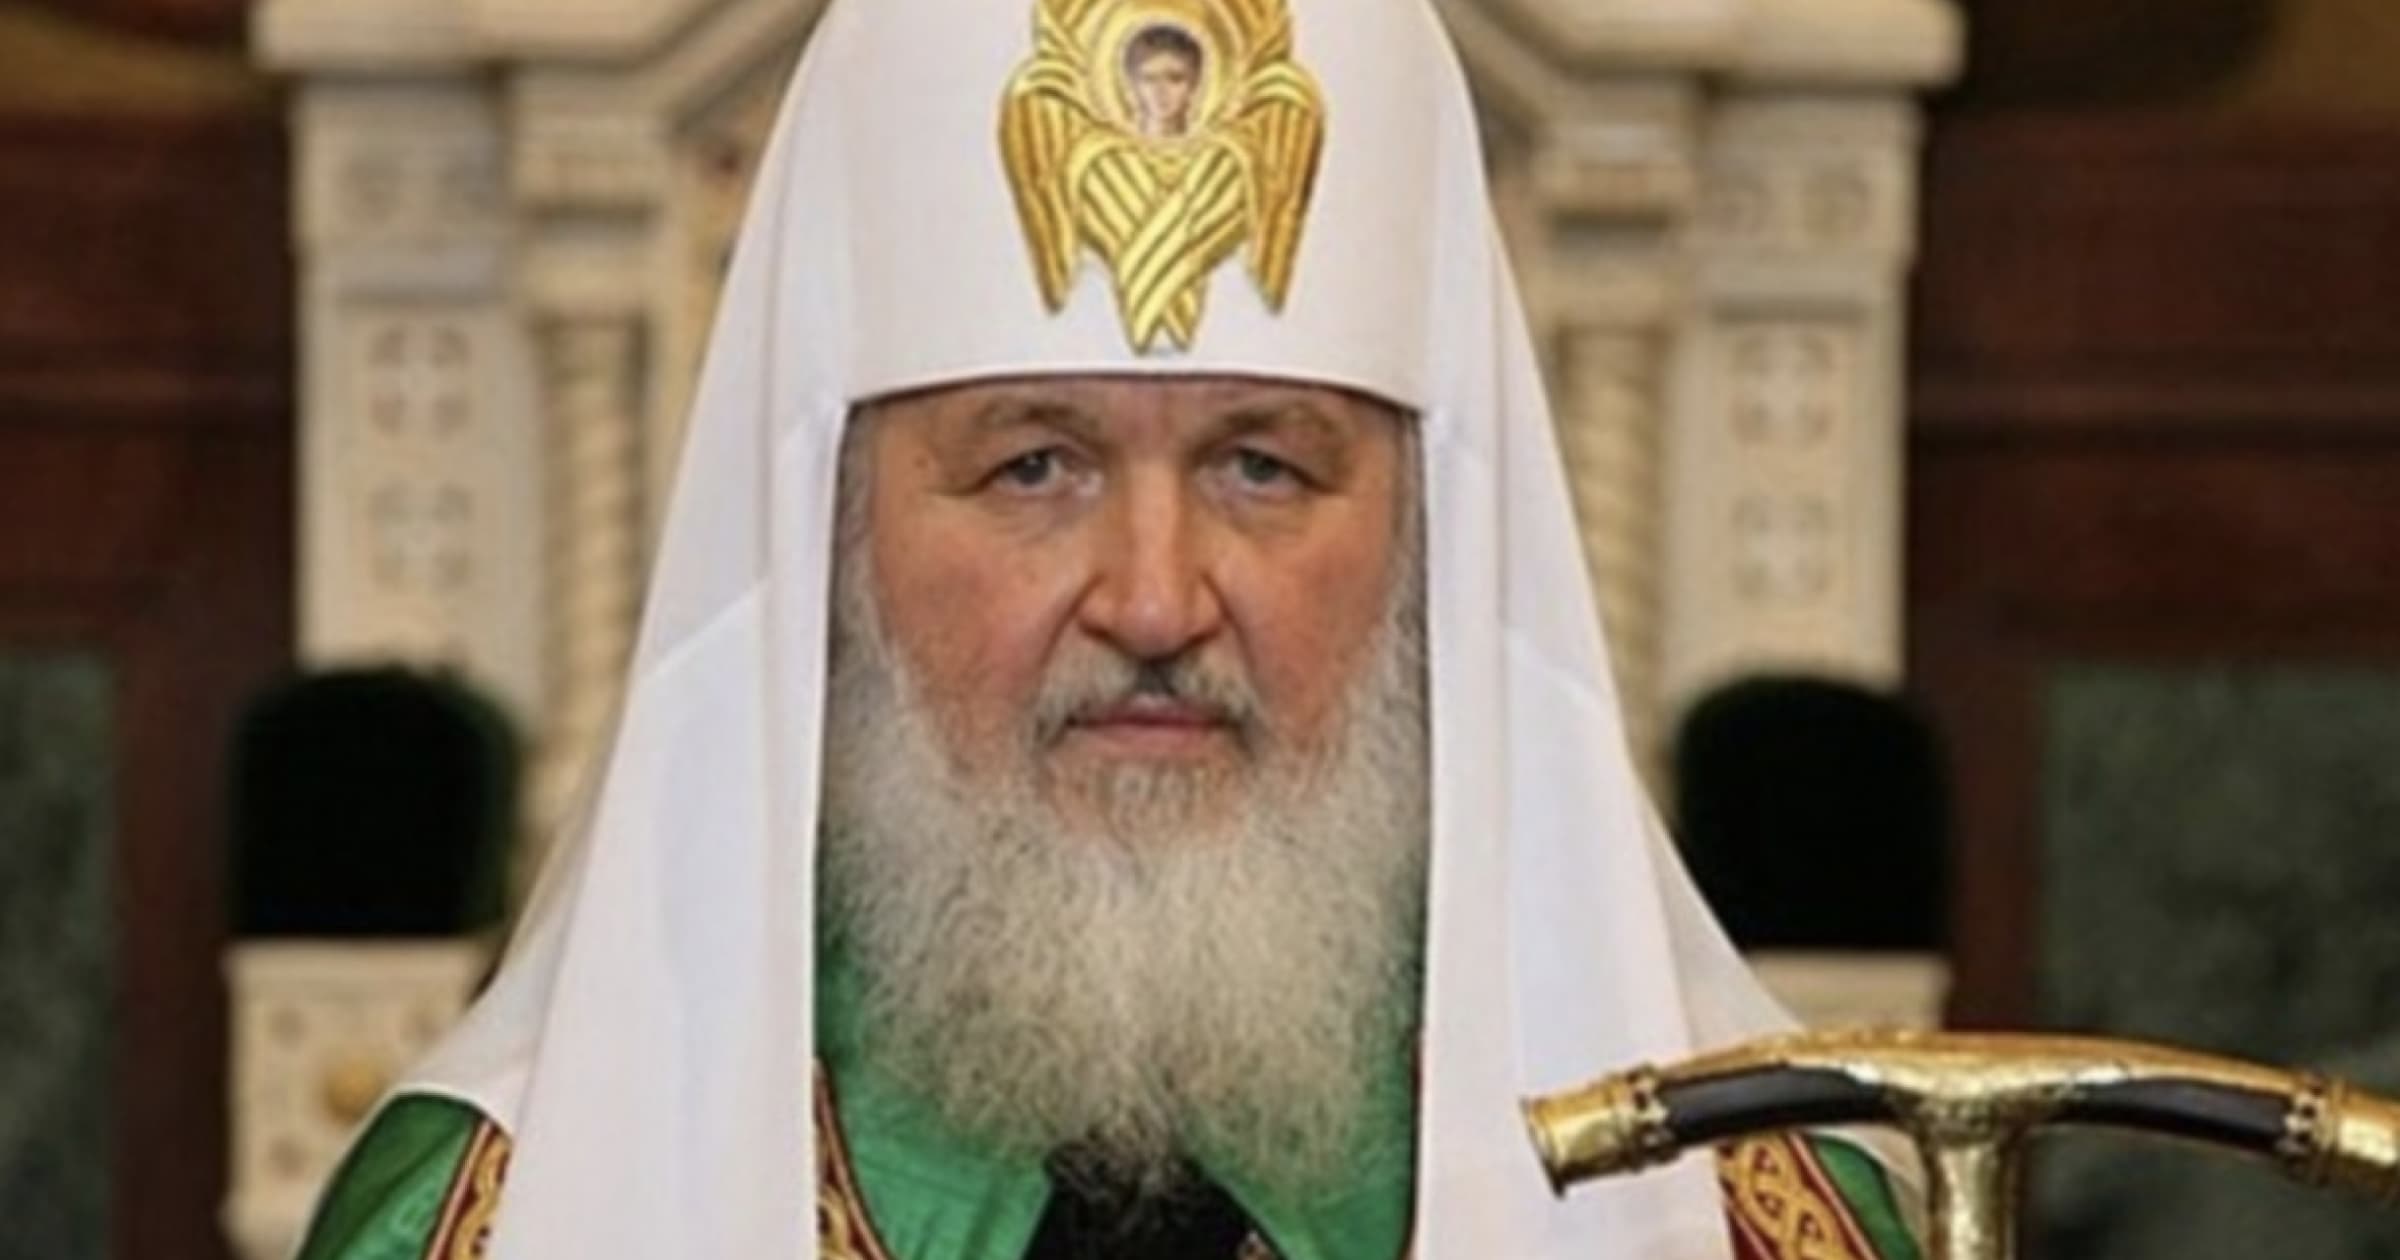 Ukraine will impose sanctions on Patriarch Kirill of Moscow and representatives of the Russian Orthodox Church